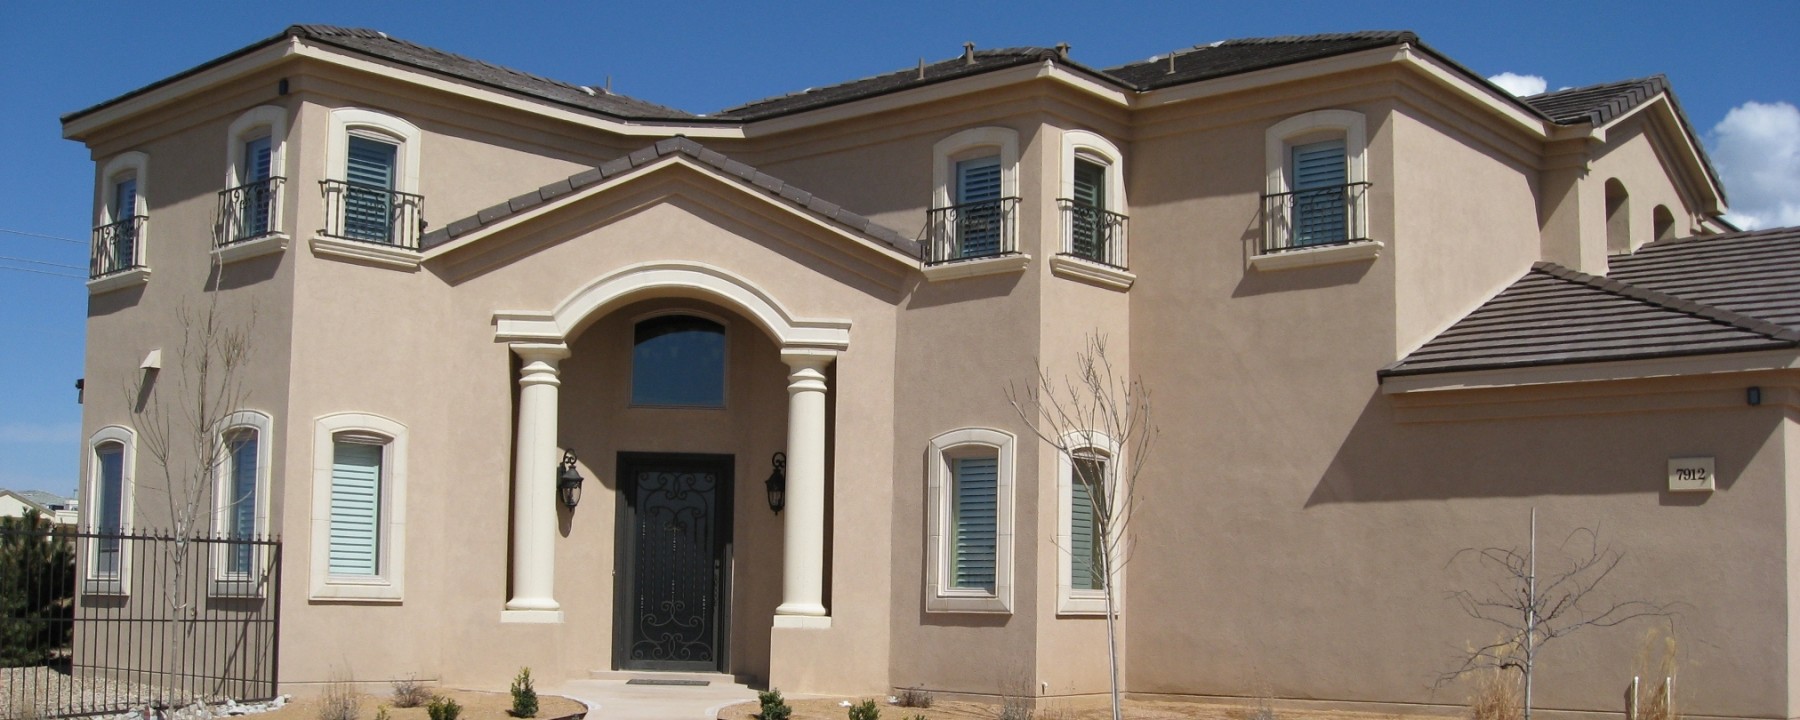 Mesa Precast | Home Architectural Design | Matching Design Elements with Precise Color Matching for High End Aesthetic Appeal | Architectural Precast, GFRC